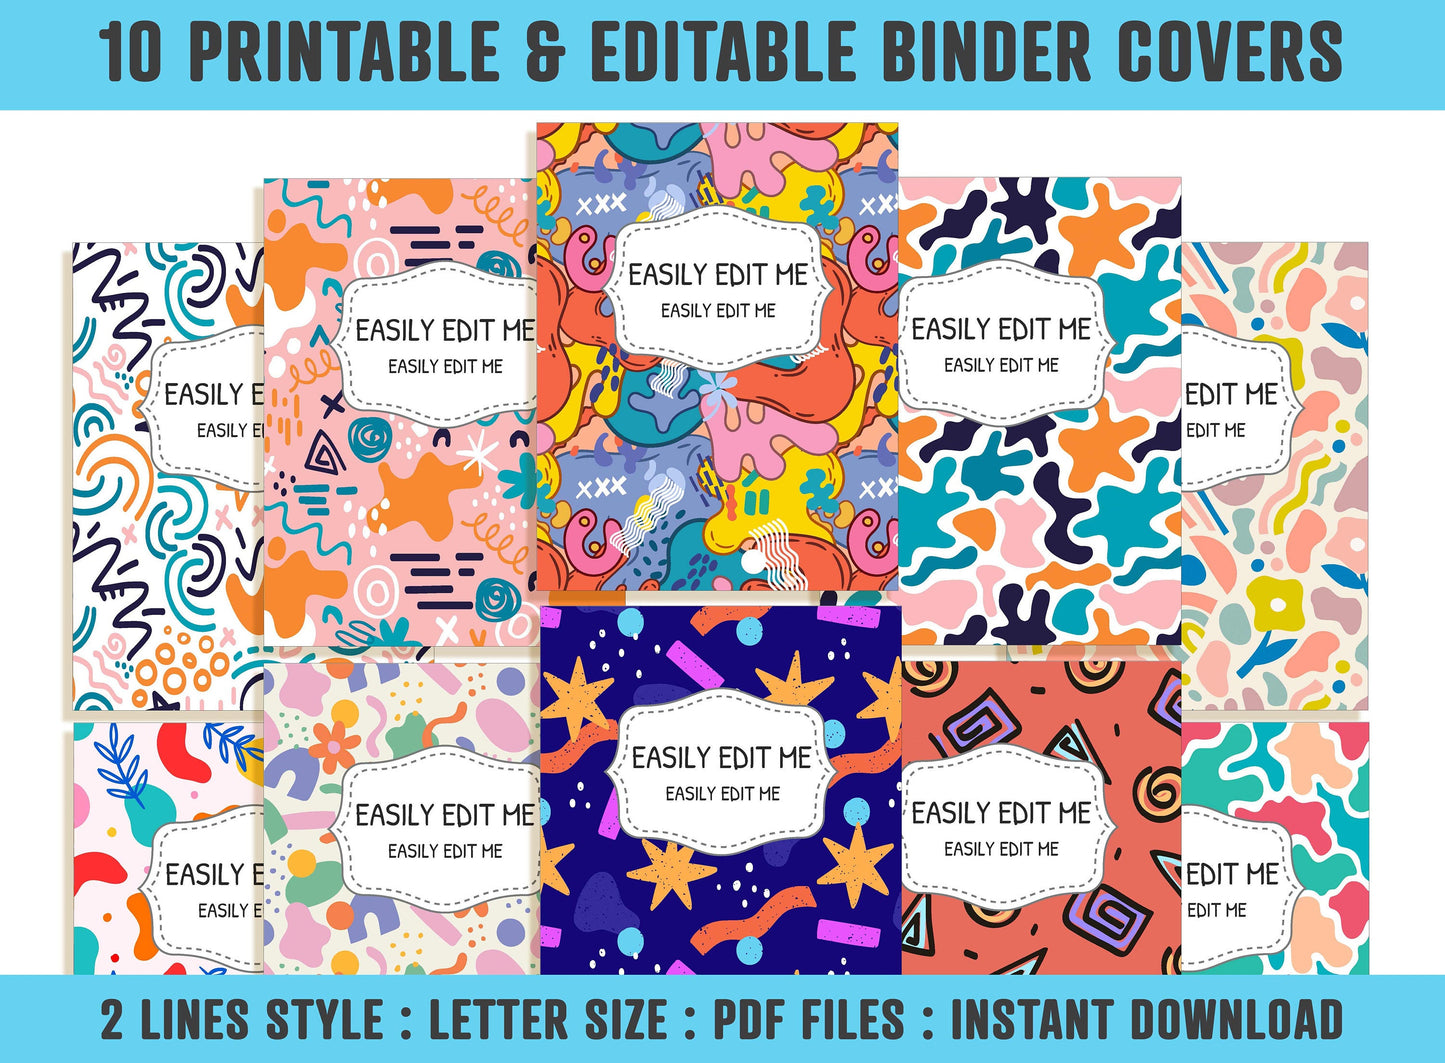 Abstract Binder Cover, 10 Printable & Editable Covers+Spines, Binder Insert, Planner Cover, Teacher Binder, School Binder Cover Template PDF